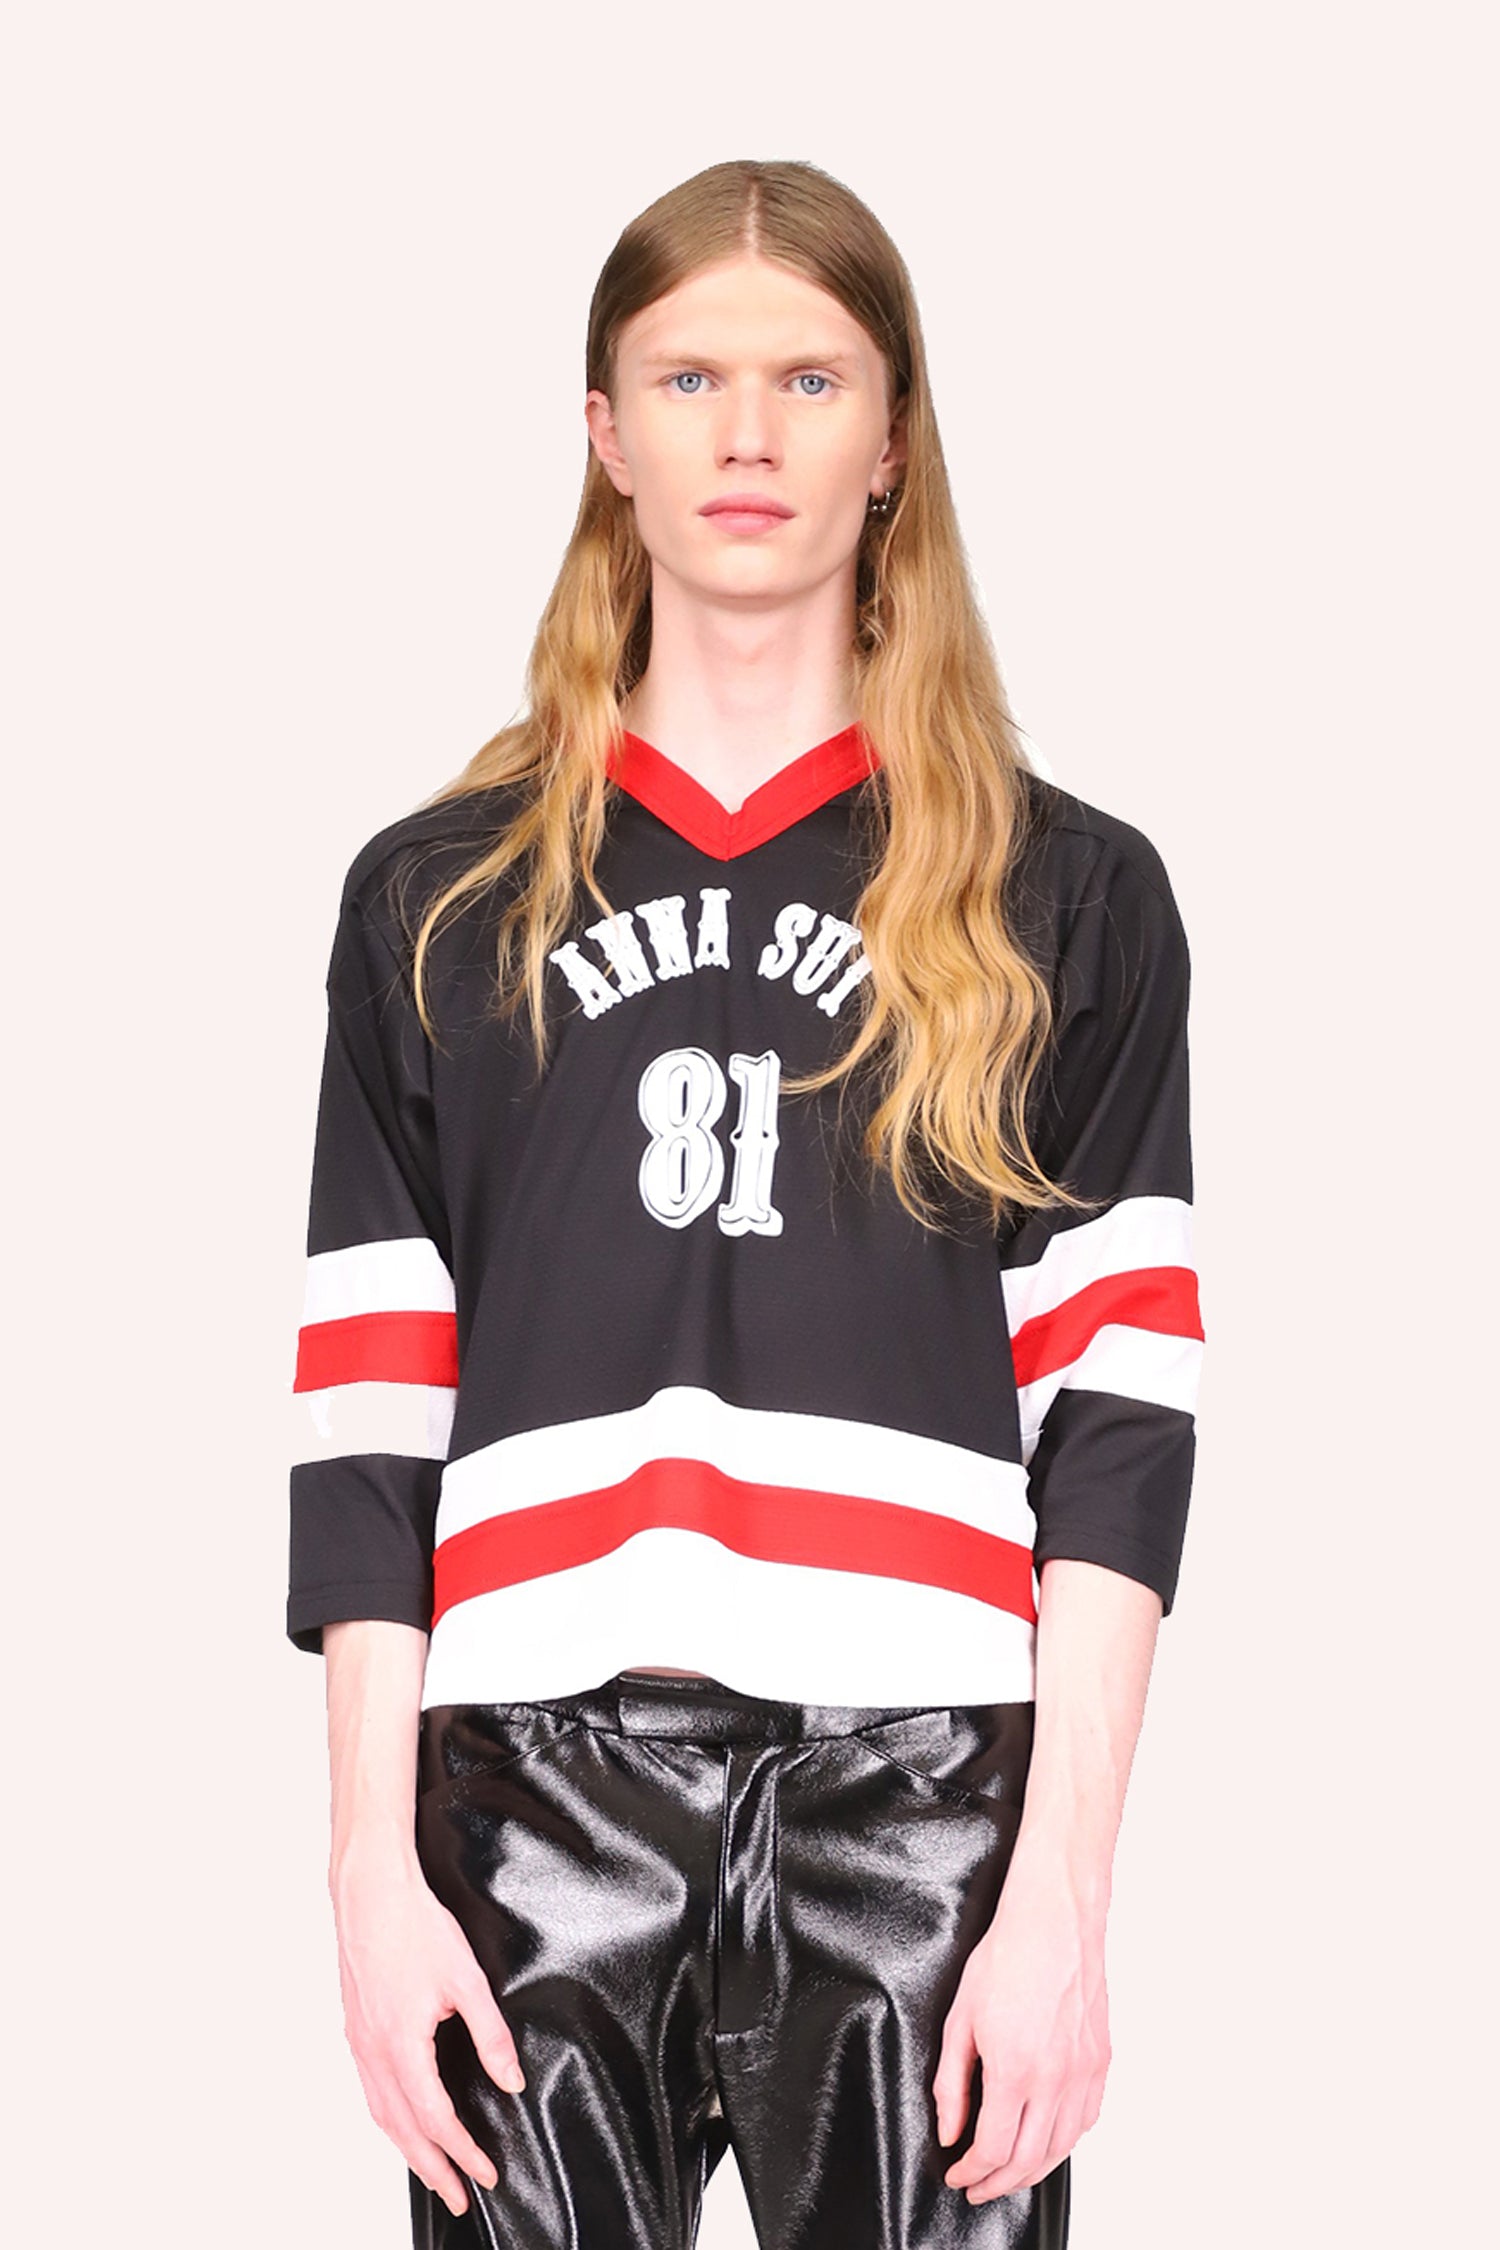 Jersey, mid arms sleeves, red v-collar, black top with Anna Sui and 81 in white, then stripes of white-red-white